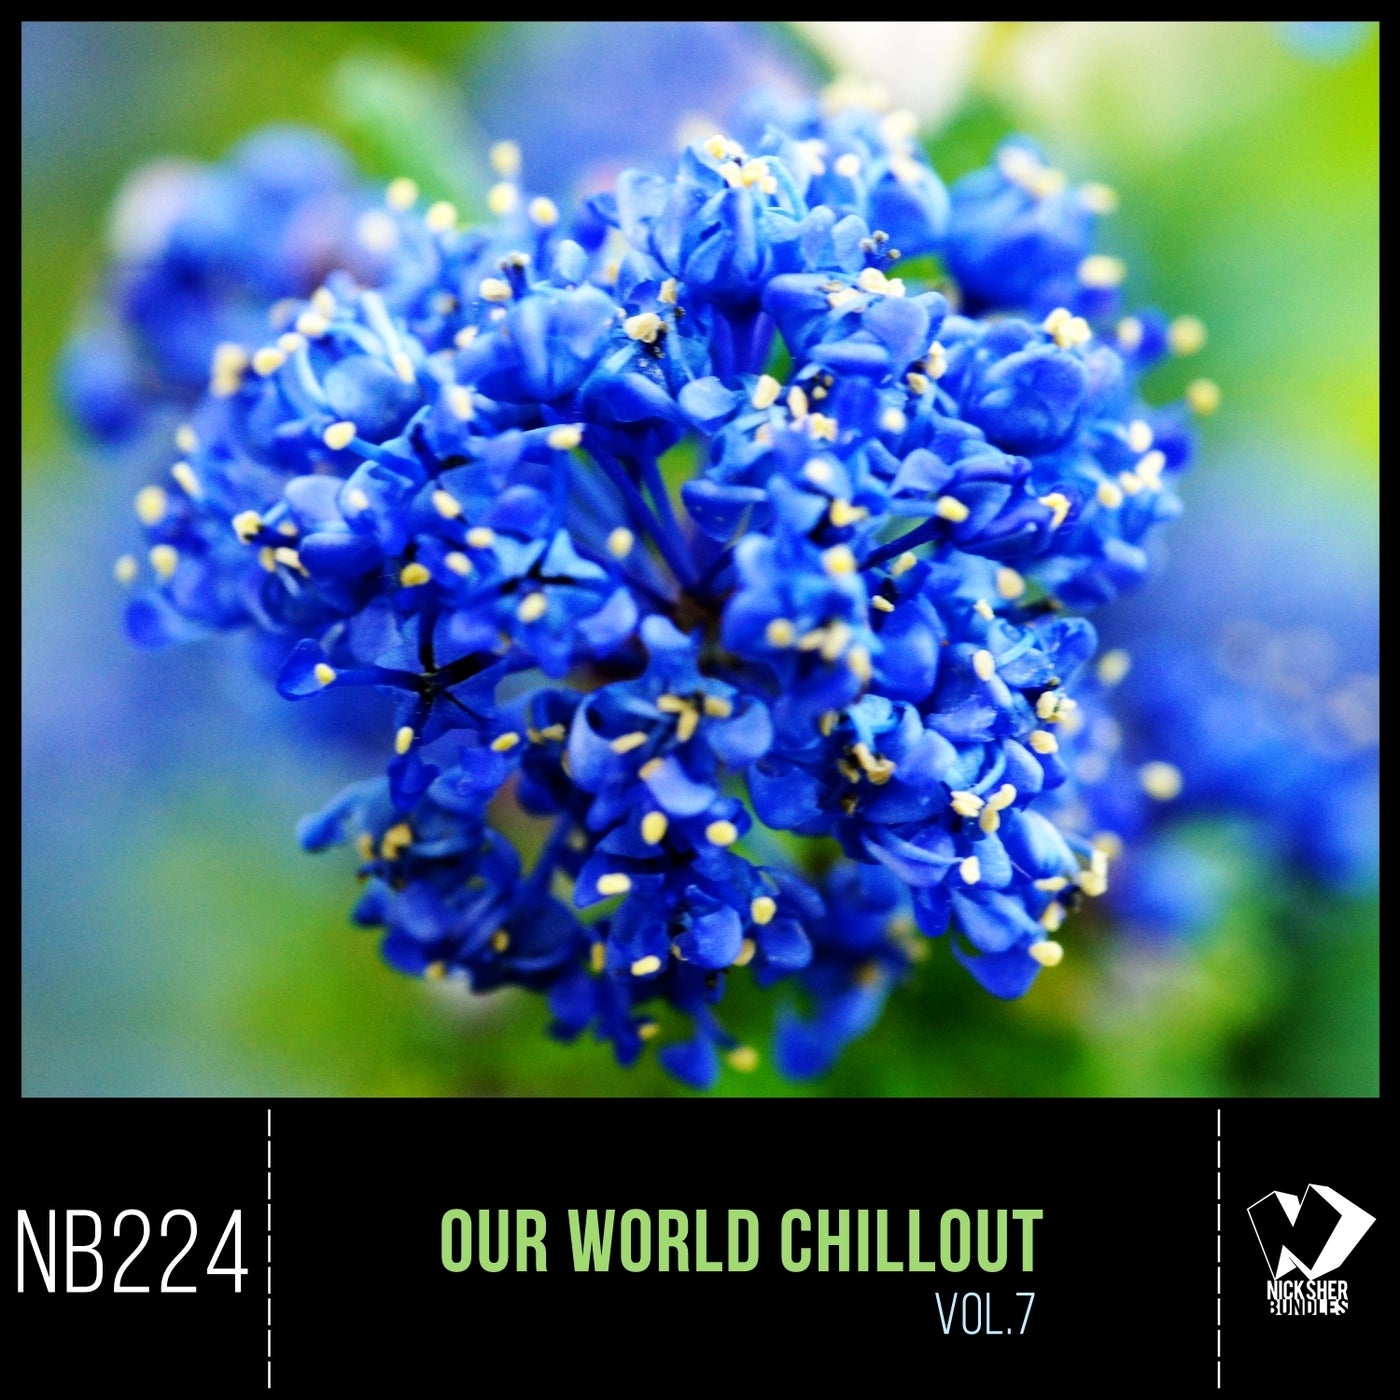 Our World Chillout, Vol. 7